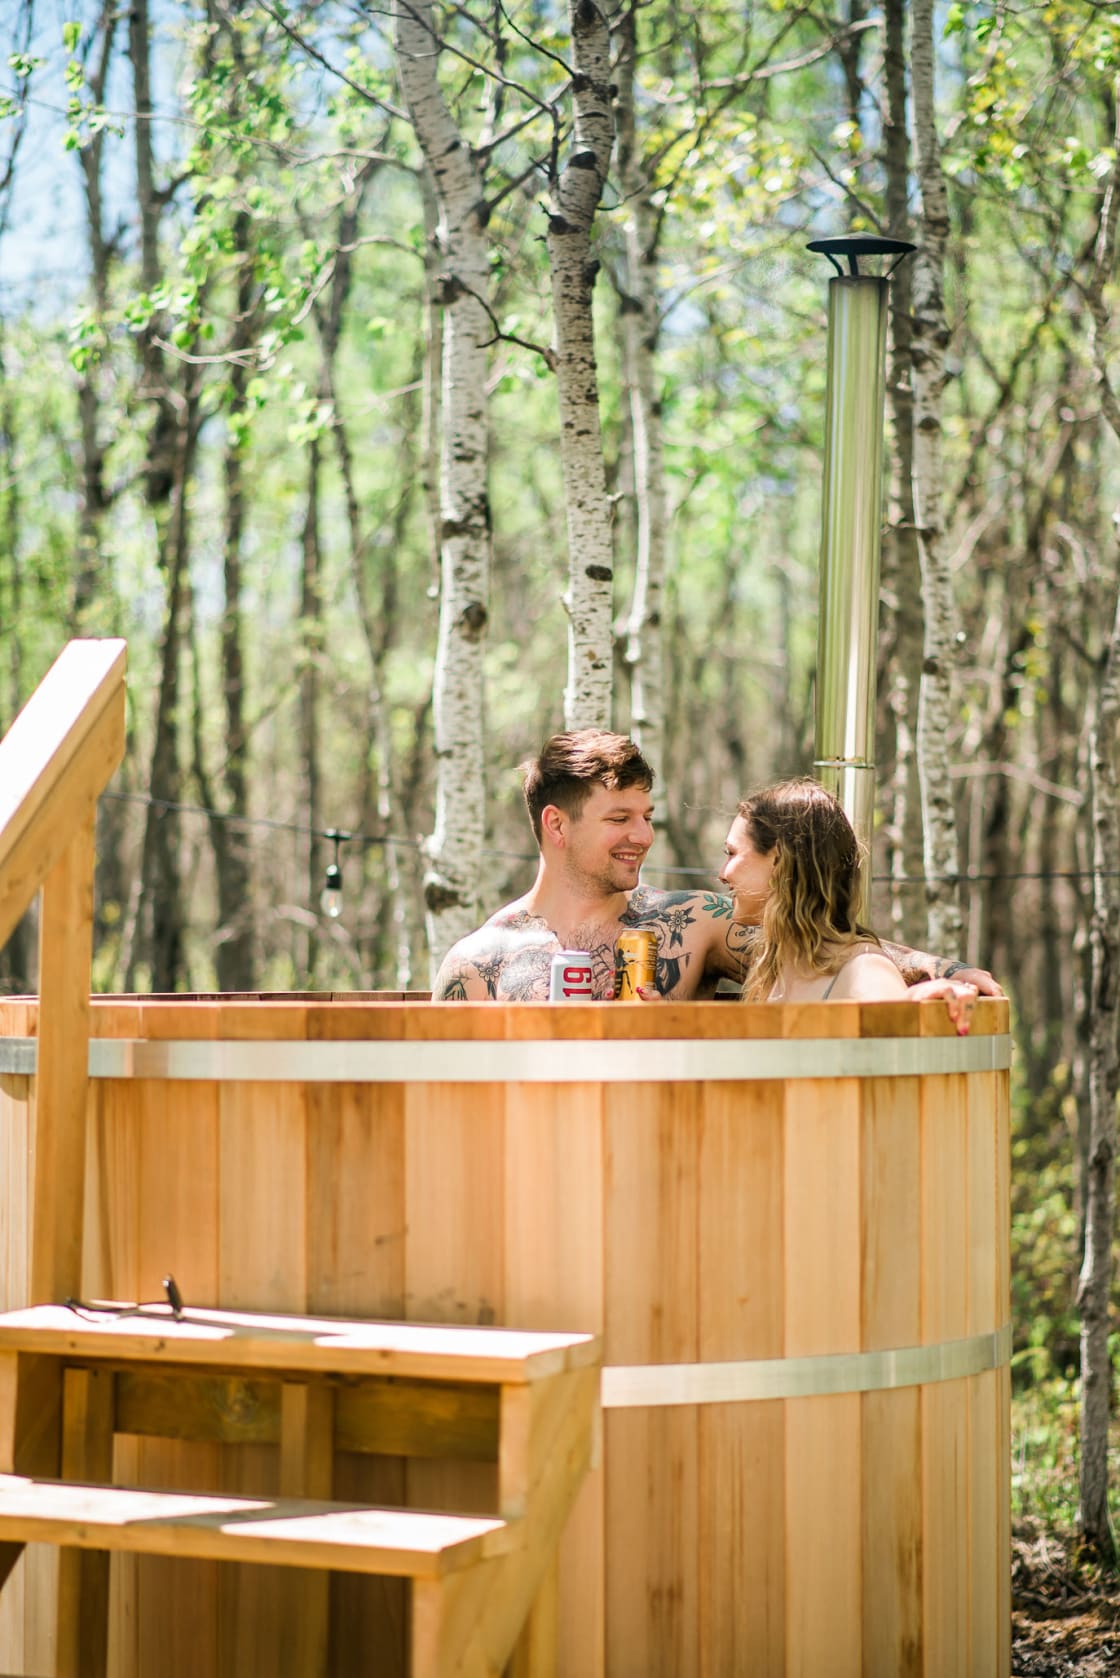 Relax in our wood fired cedar hot tub or sauna! 